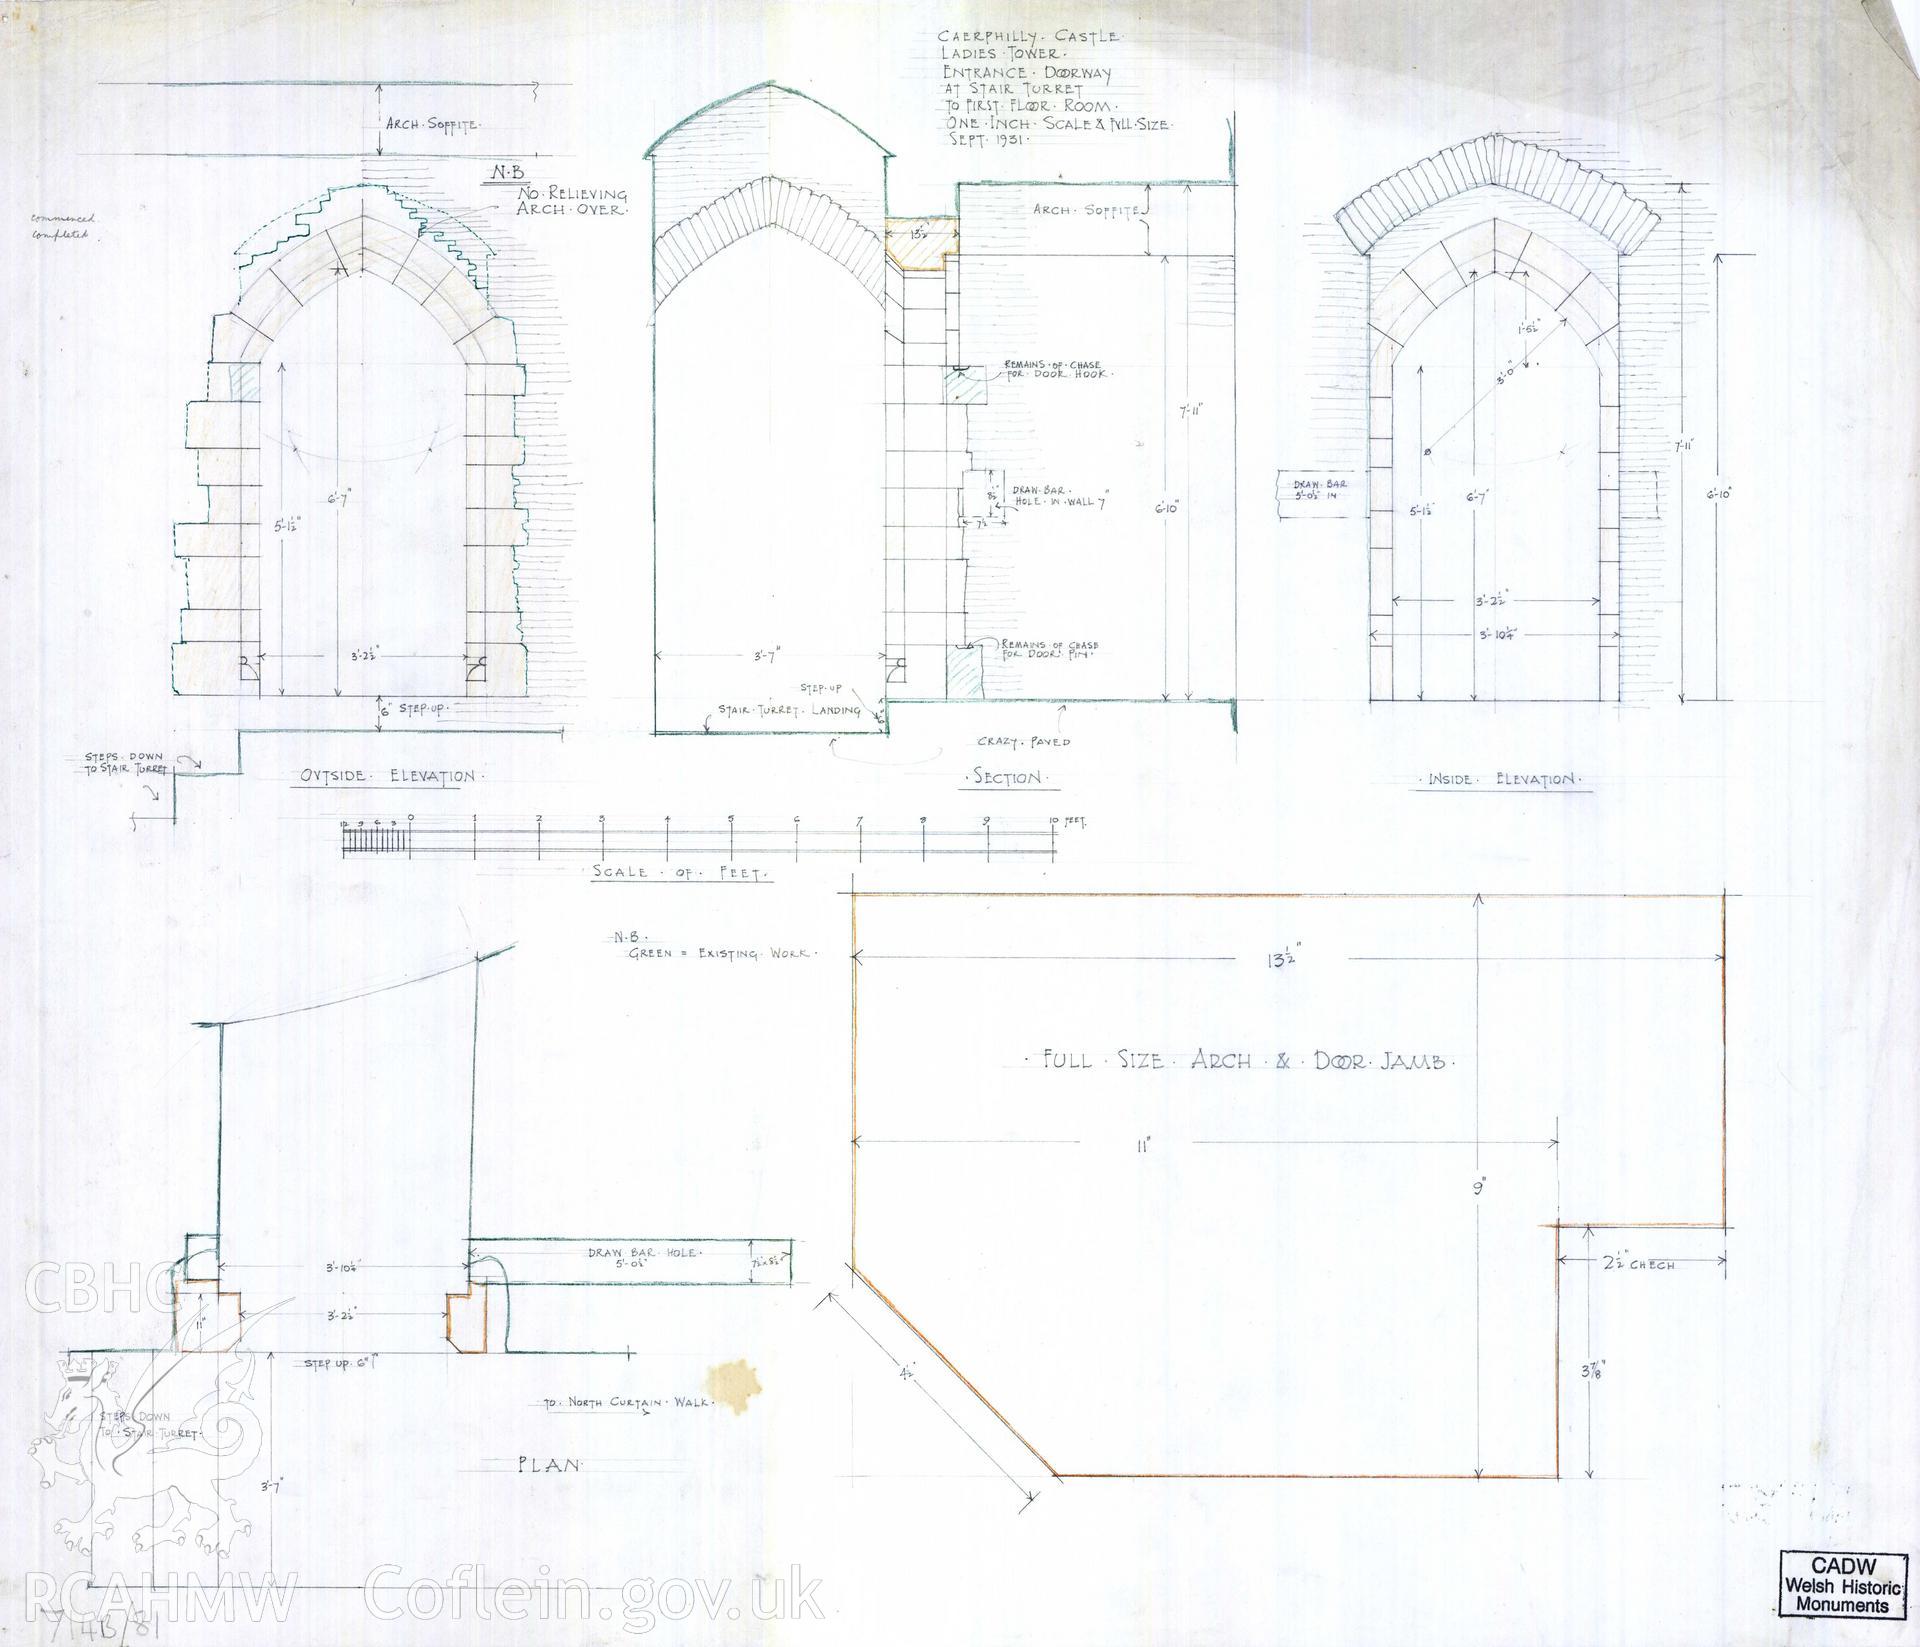 Cadw guardianship monument drawing of Caerphilly Castle. NW tower, upper floor, stairs door. Cadw ref. no: 714B/81. Scale 1:12.1. Digital copy on Cadw CD C1. Original drawing withdrawn and returned to Cadw at their request.